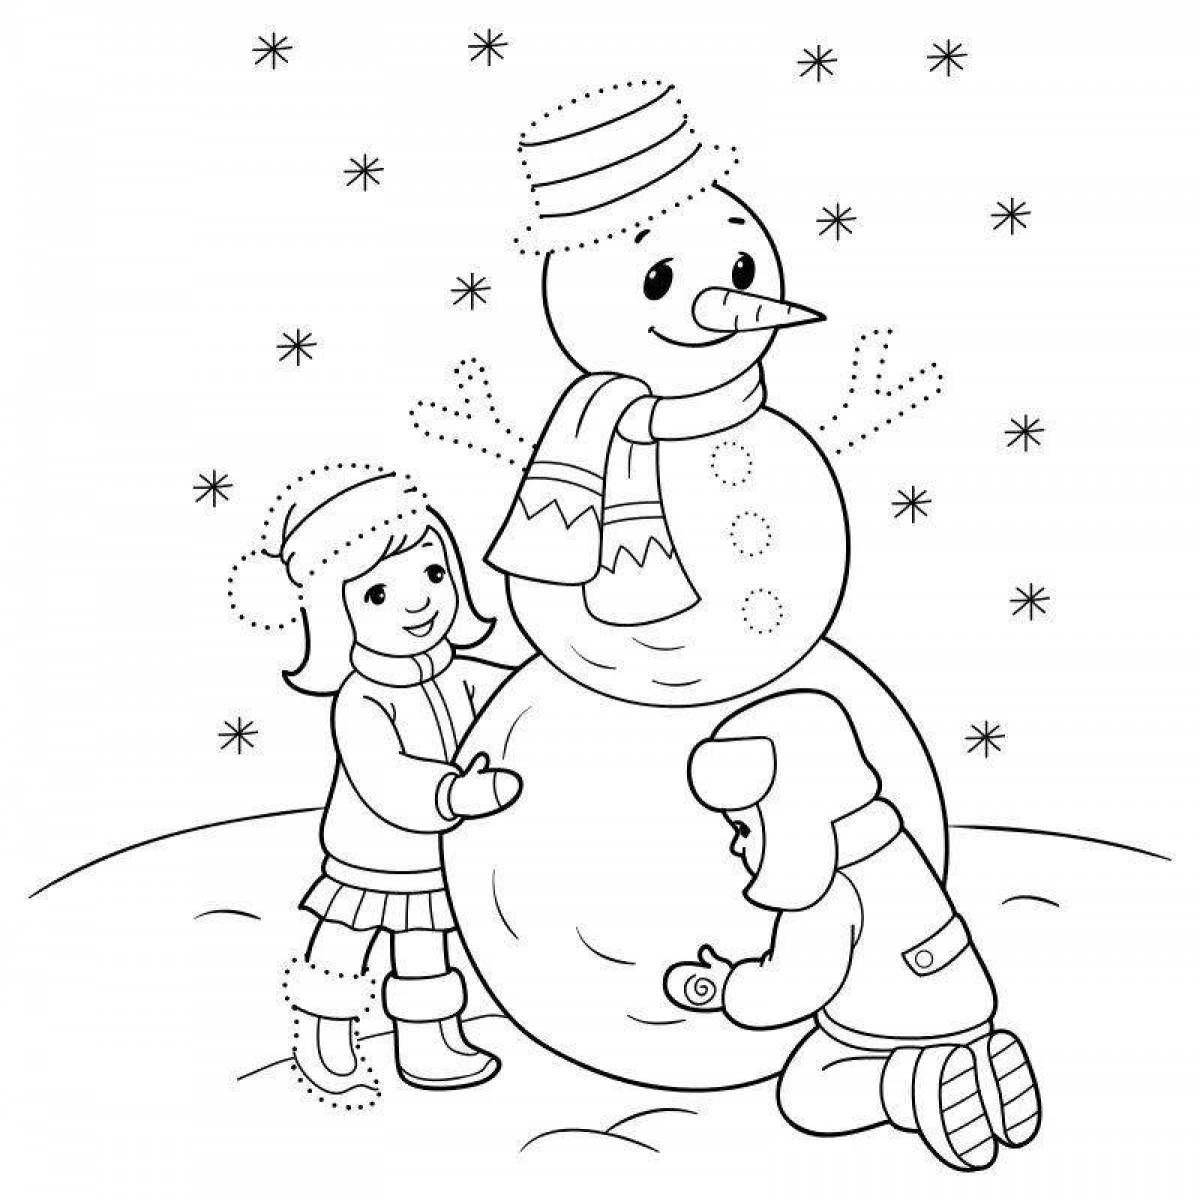 Glamorous winter coloring for children 3-4 years old